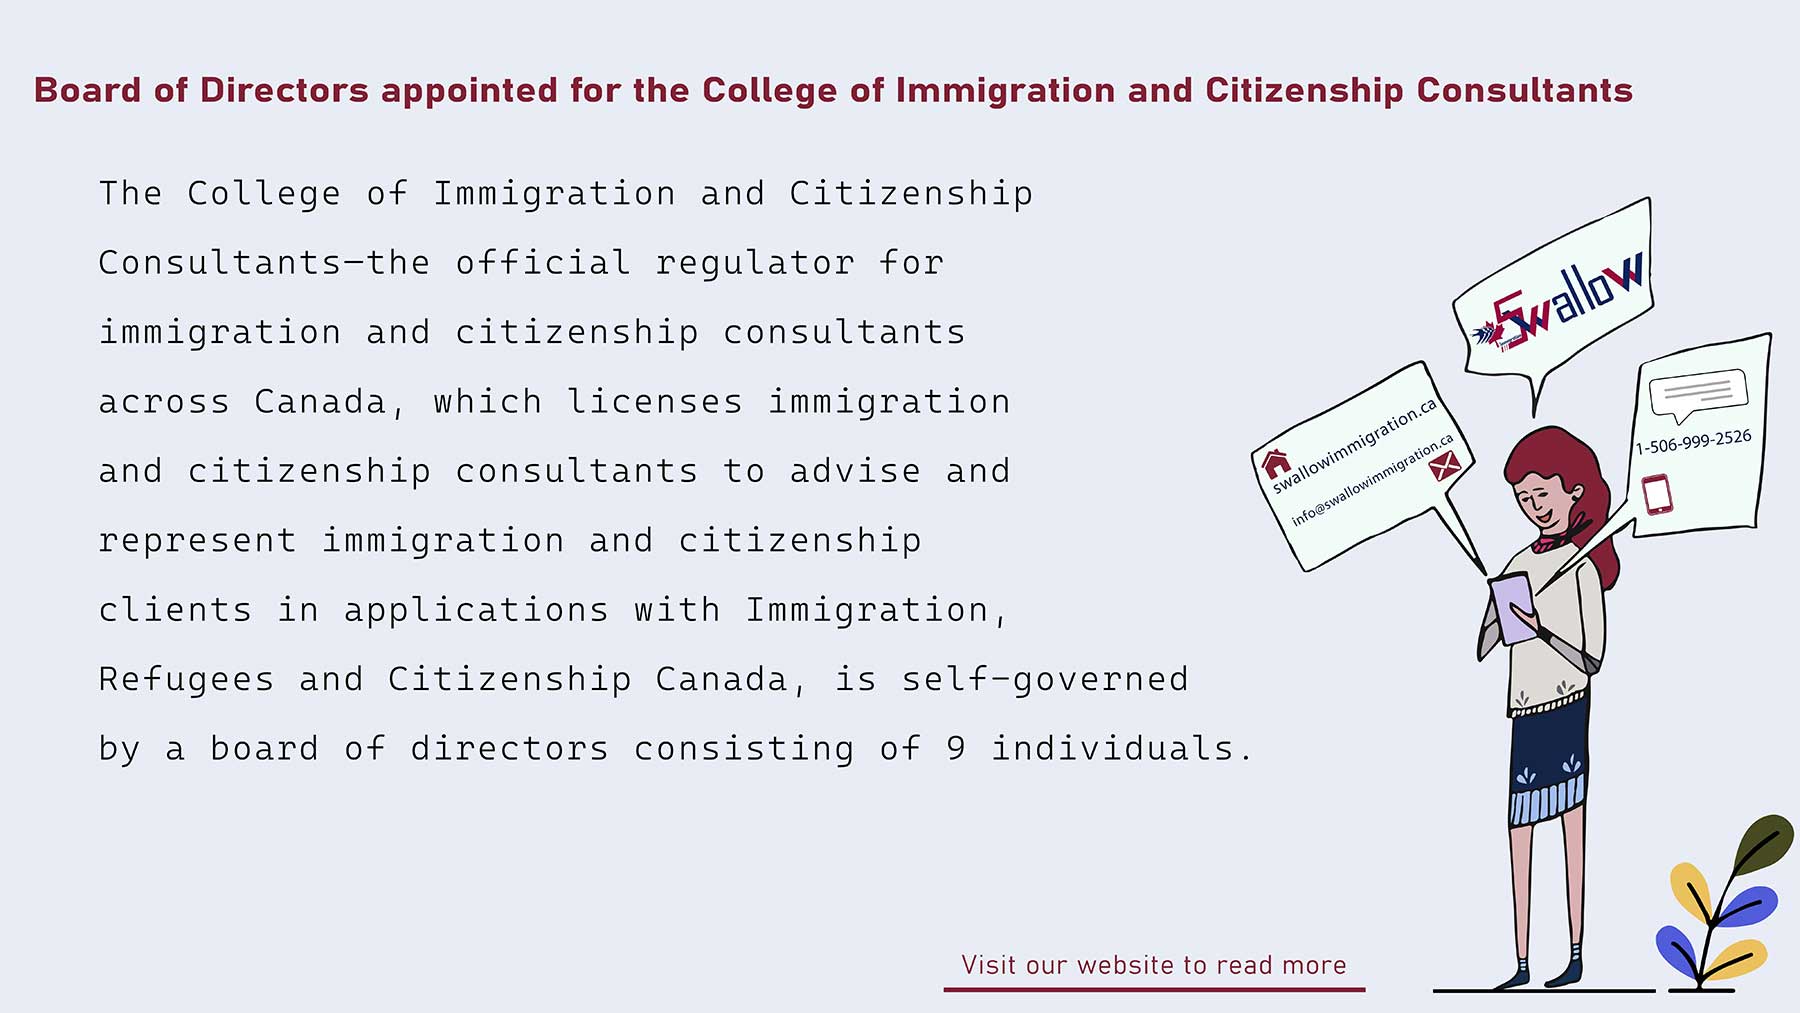 Board of Directors appointed for the College of Immigration and Citizenship Consultants